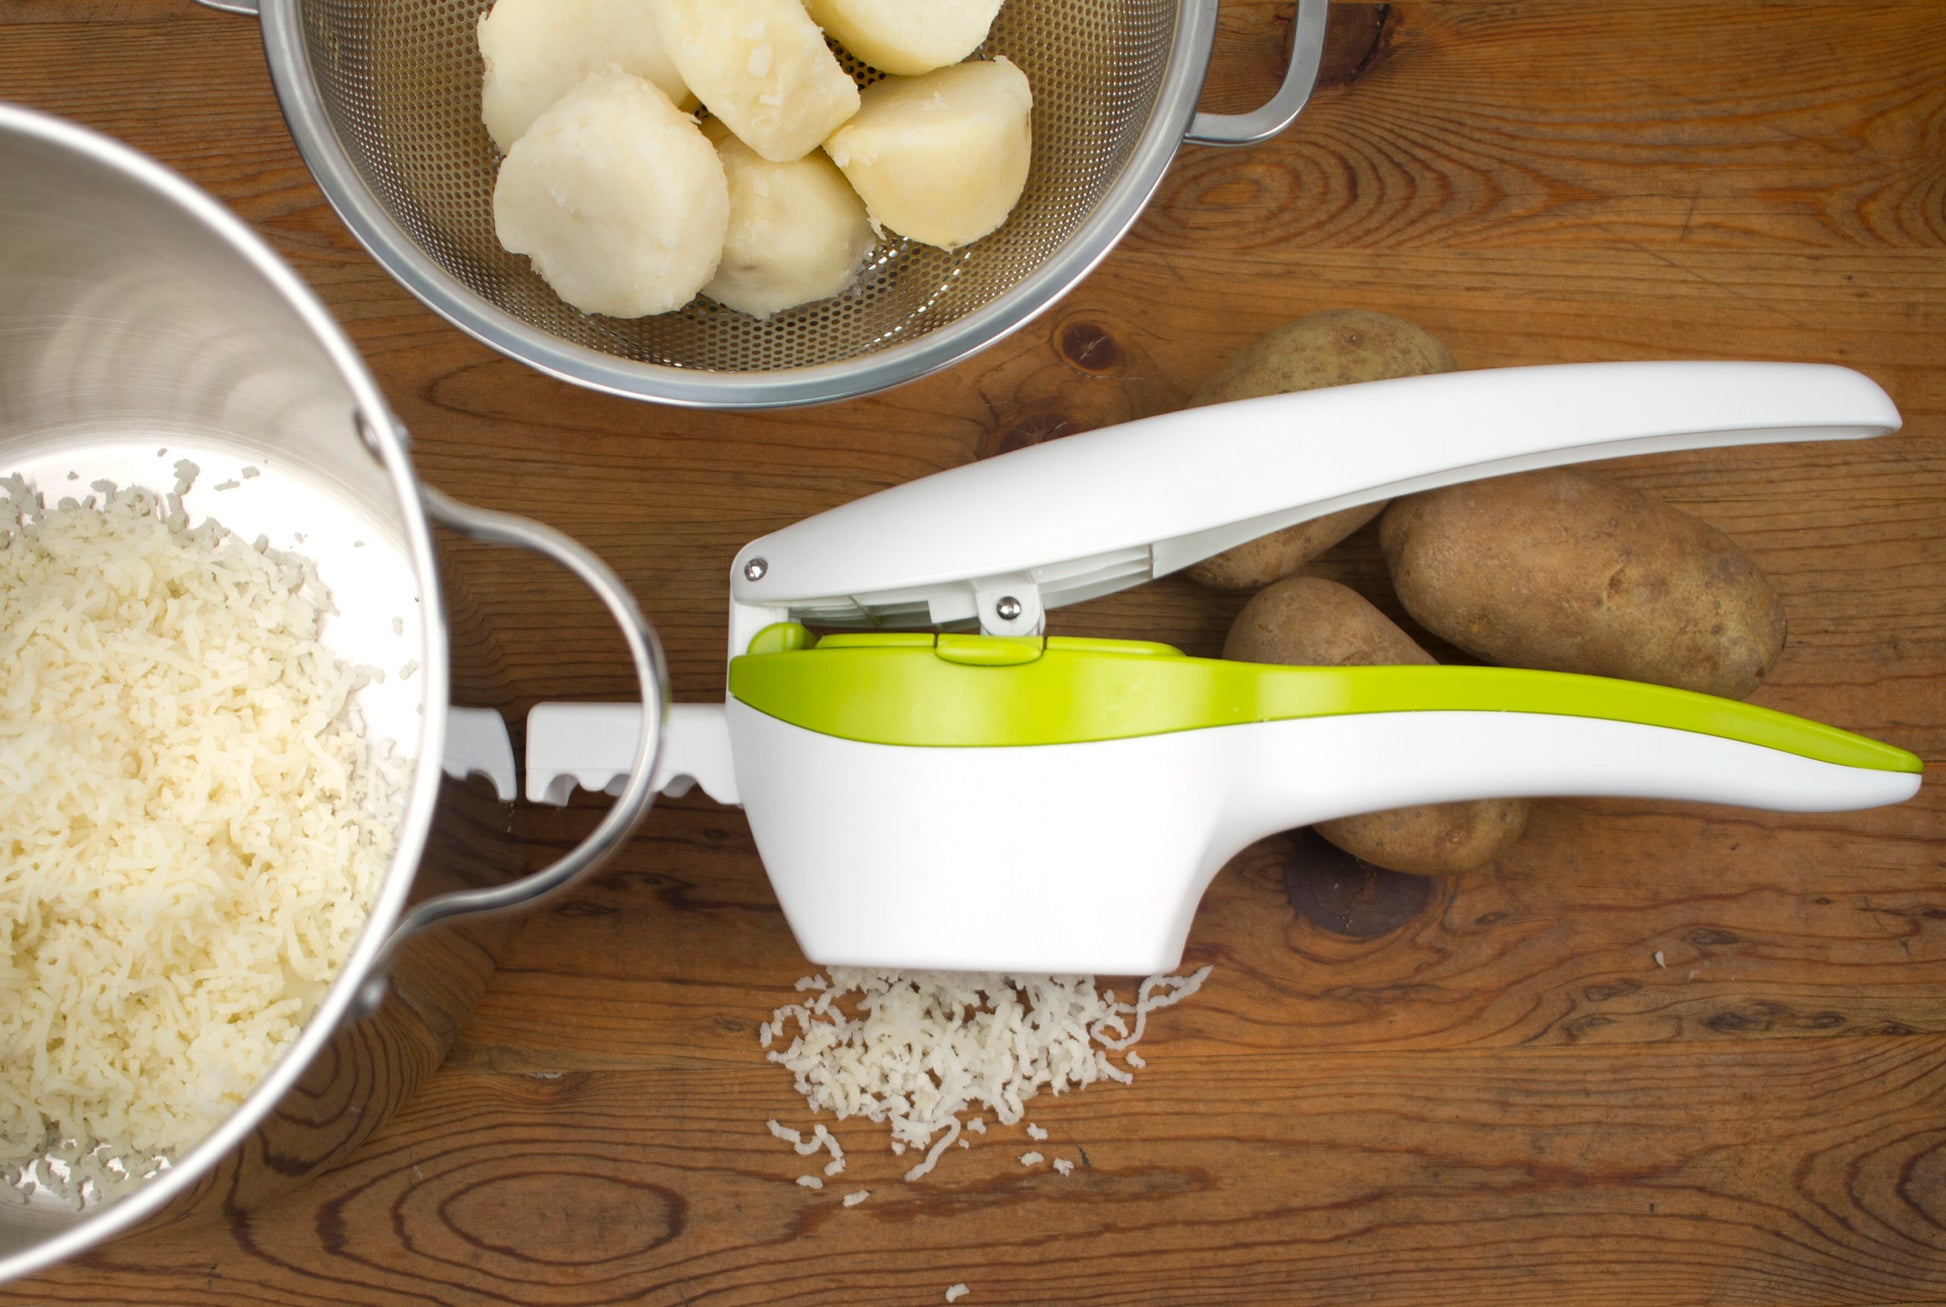 potato ricer on wood counter with potatoes, colander or peeled potatoes, and pan of riced potatoes.